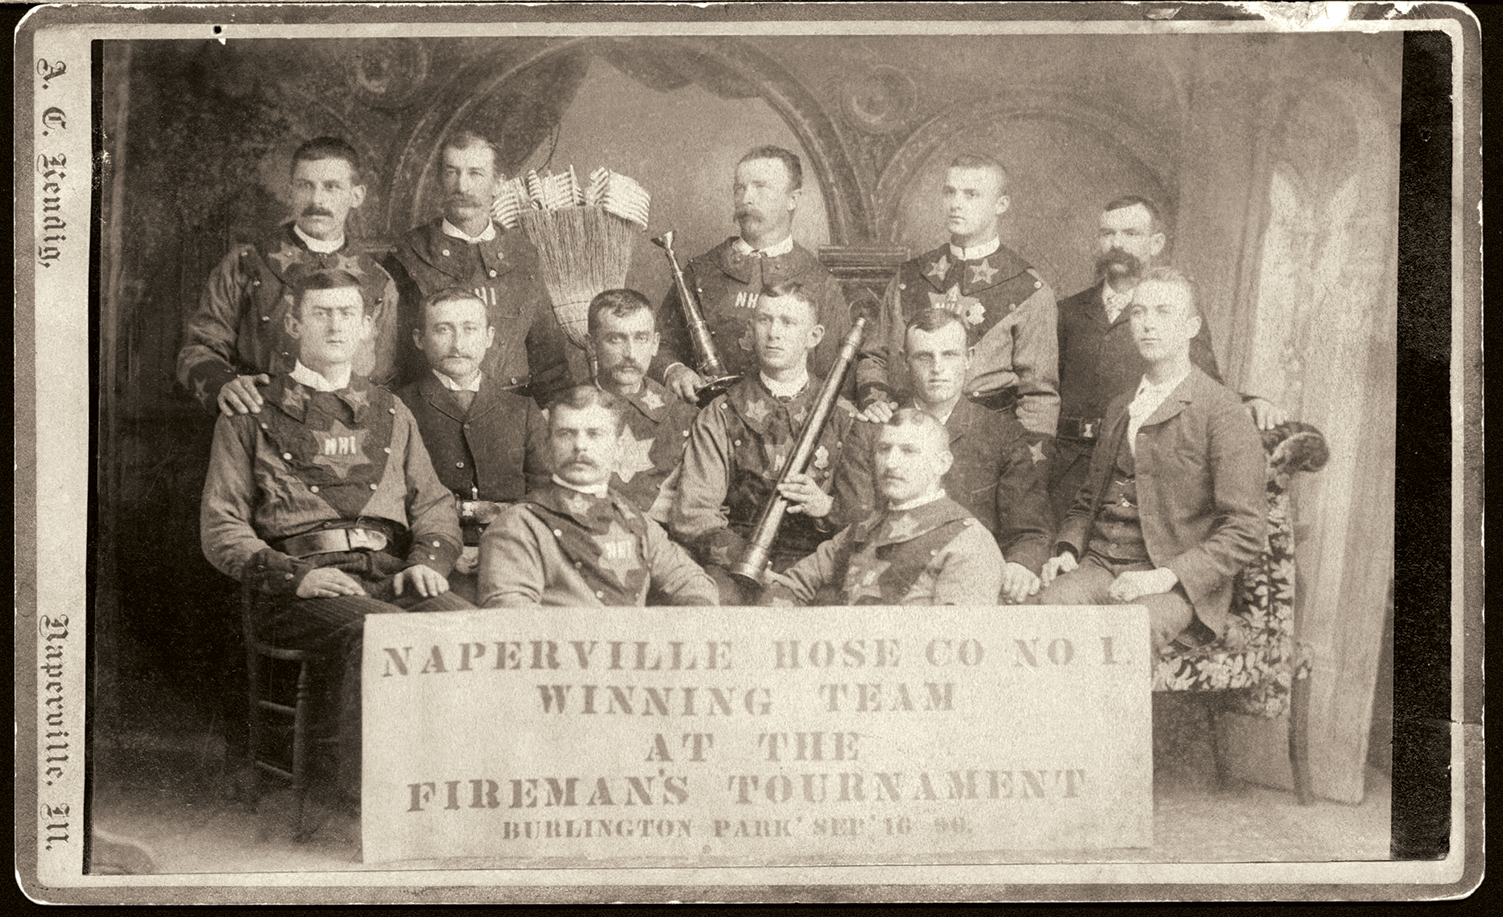 Naperville Hose Company Number 1's winning team at Fireman's Tournament, 1890
 